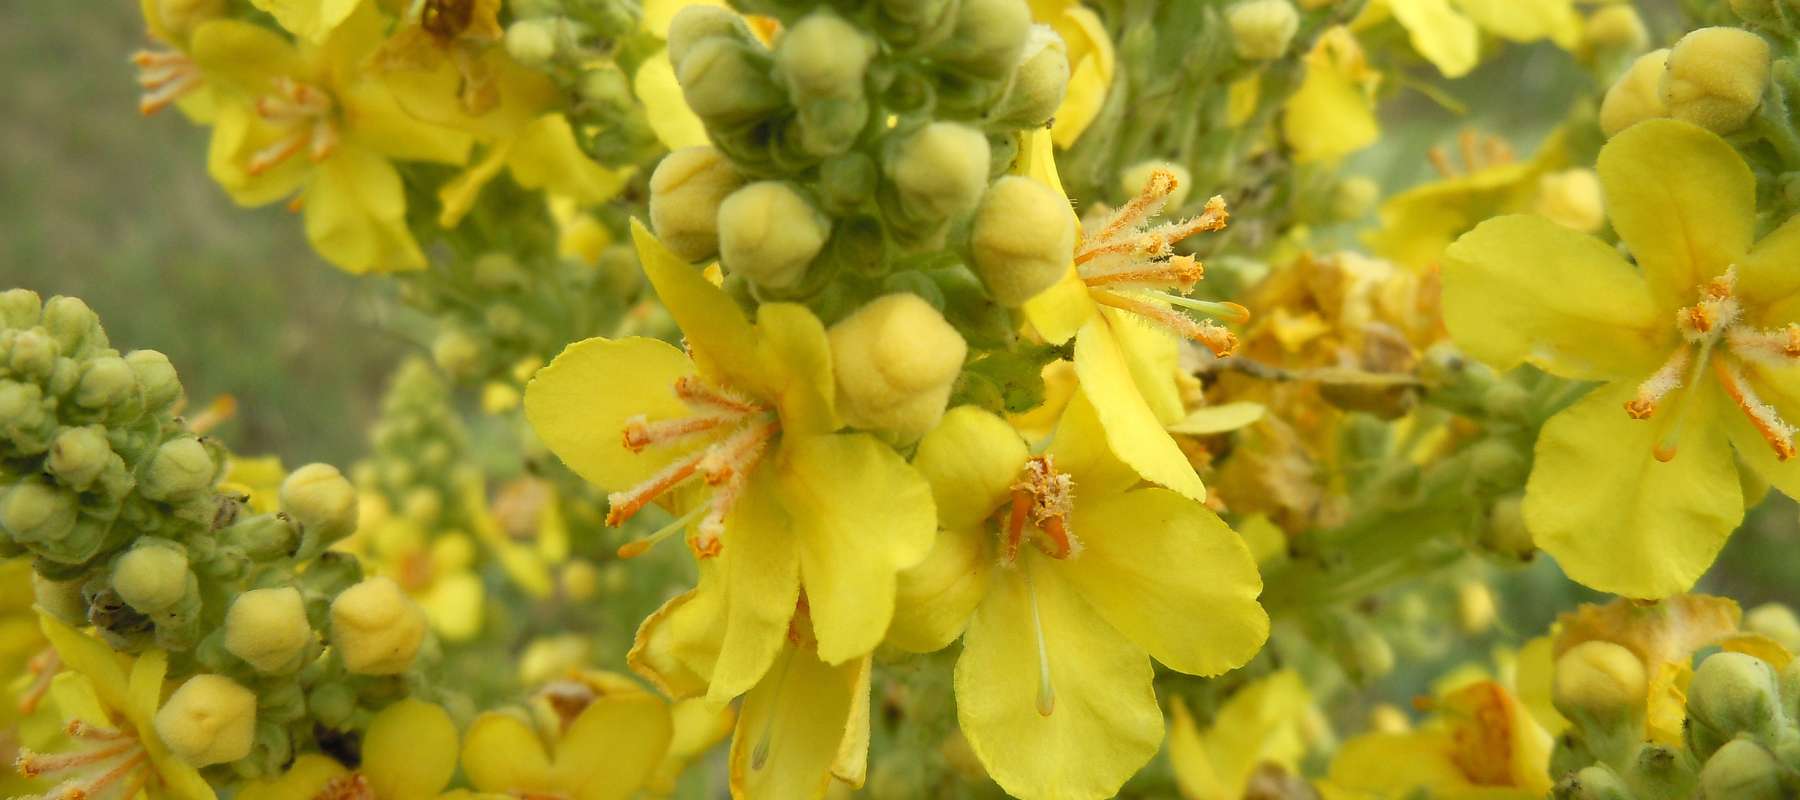 Mullein: An Ancient Therapeutic Herb